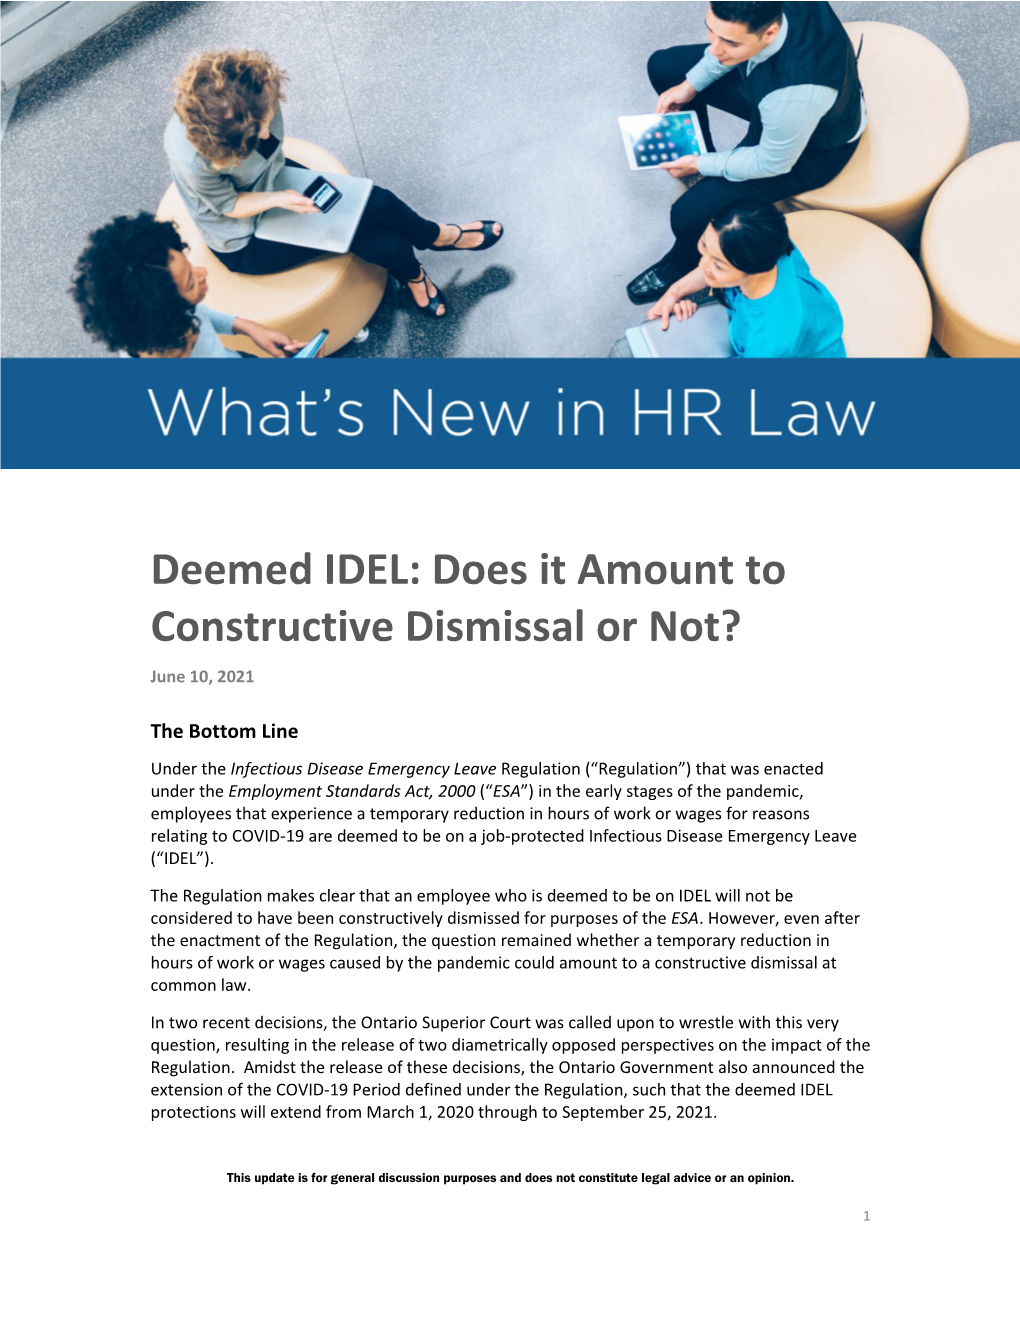 Deemed IDEL: Does It Amount to Constructive Dismissal Or Not? June 10, 2021